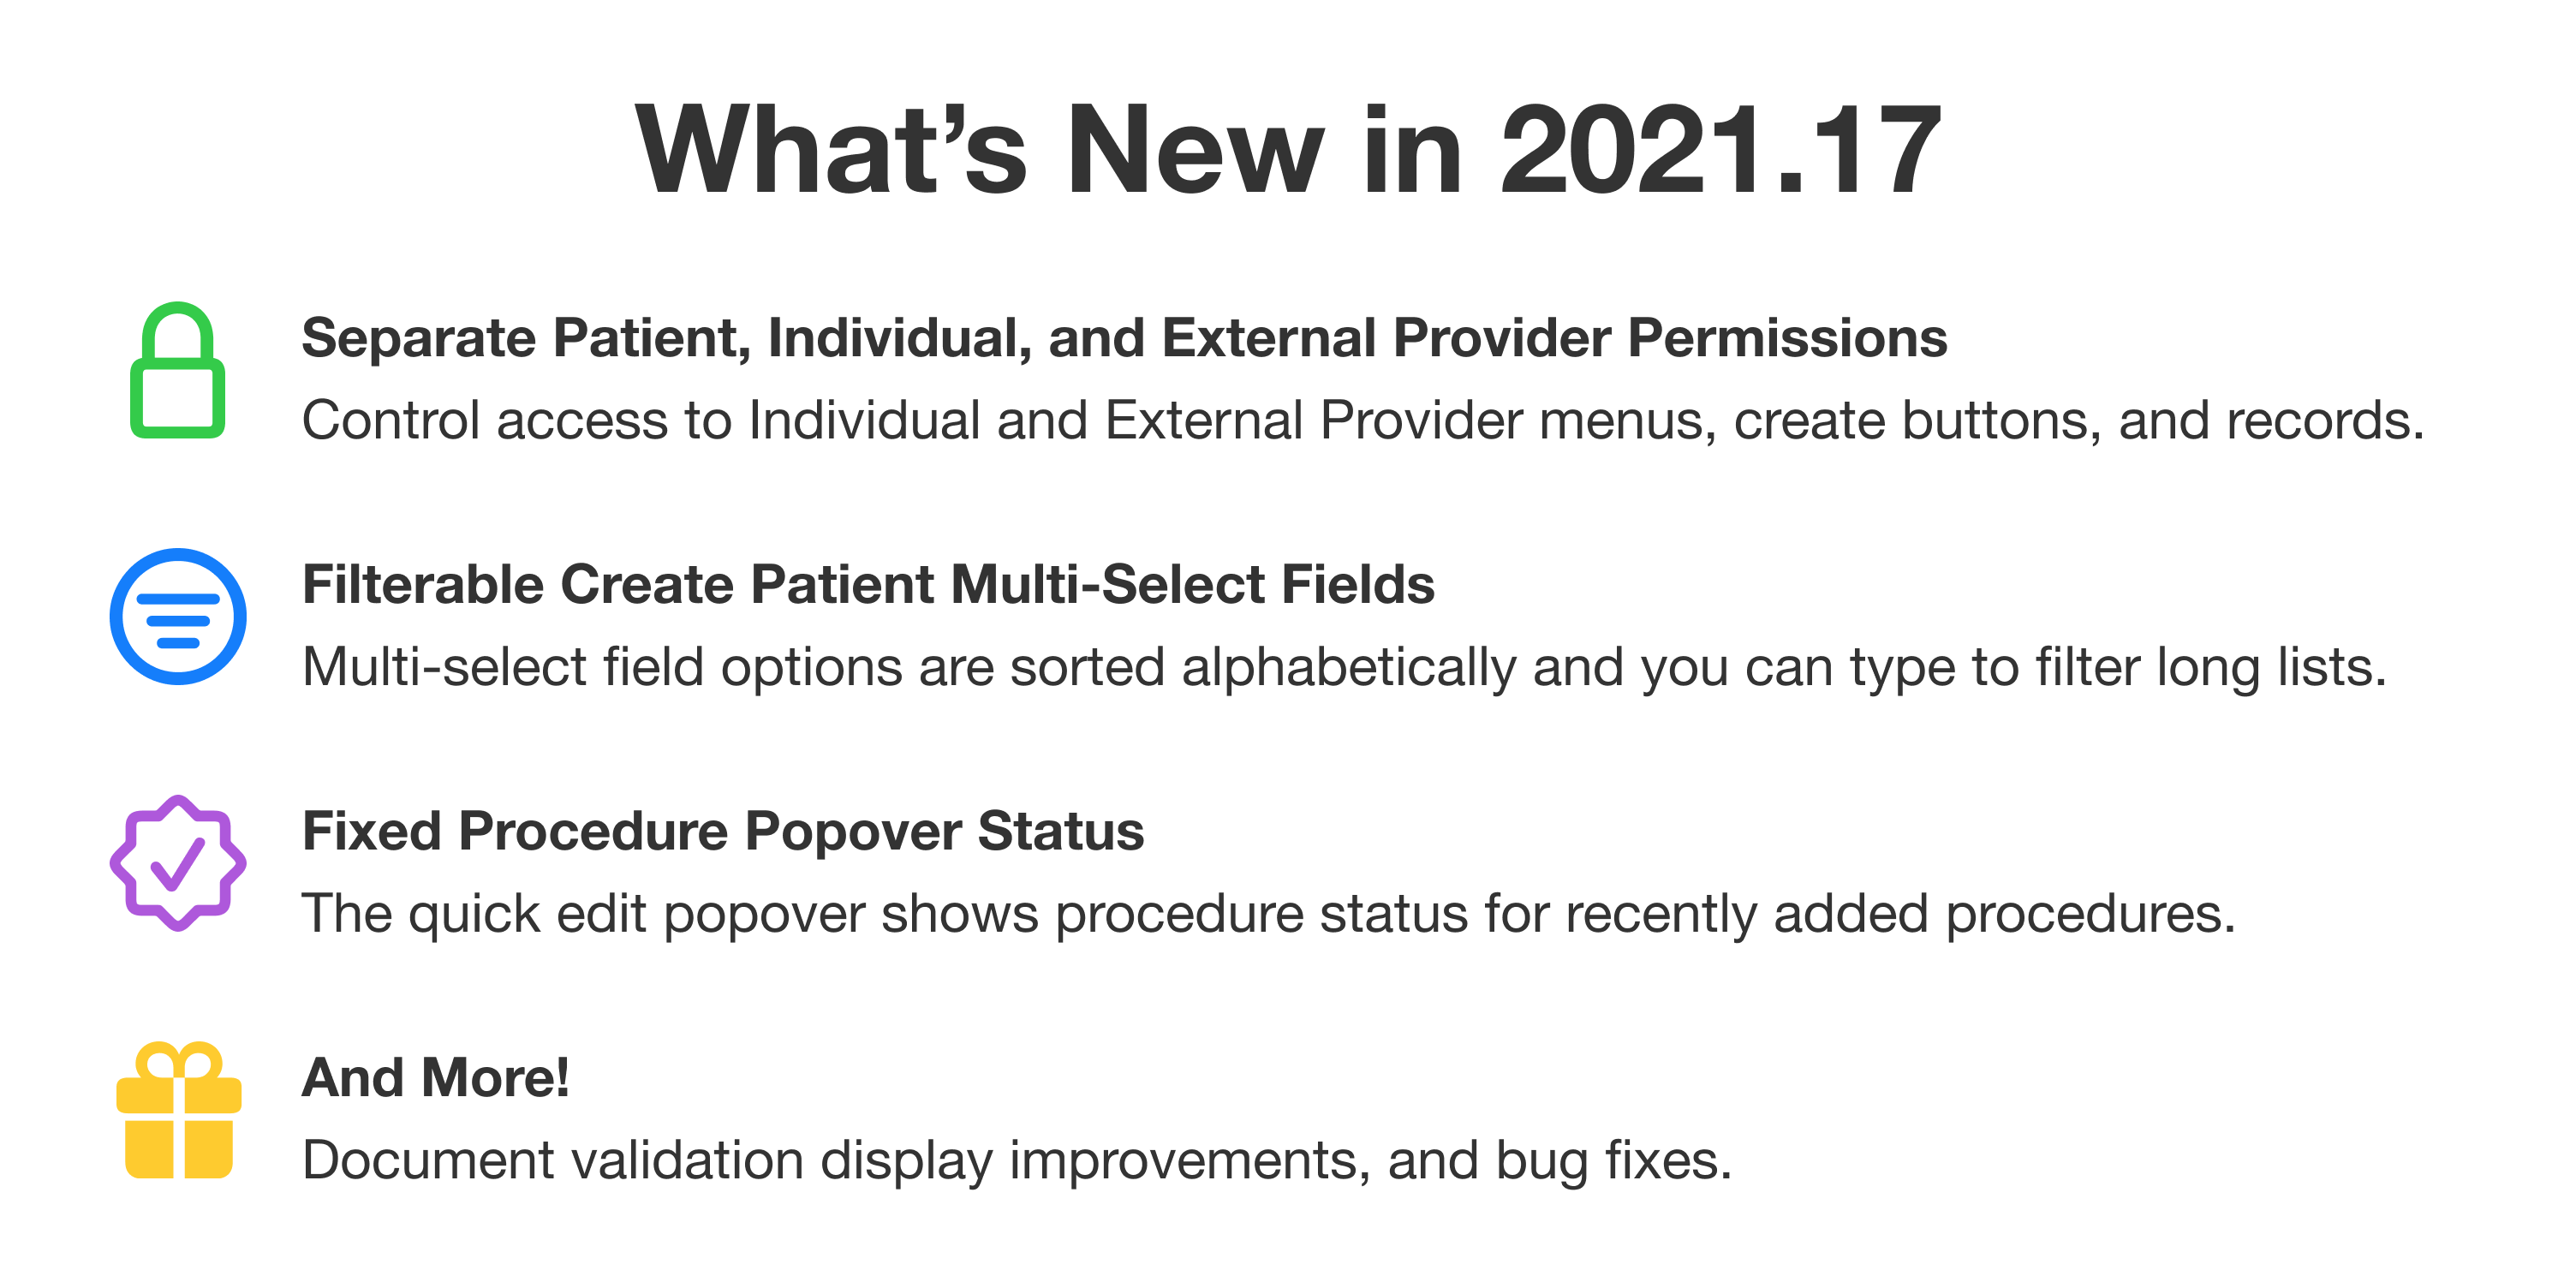 What's new in 2021.17. First: Separate Patient, Individual, and External Provider Permissions. Control access to Individual and External Provider menus, create buttons, and records. Second: Filterable Create Patient Multi-Select Fields. Multi-select field options are sorted alphabetically and you can type to filter long lists. Third: Fixed Procedure Popover Status. The quick edit popover shows procedure status for recently added procedures. And more! Document validation display improvements, and bug fixes.